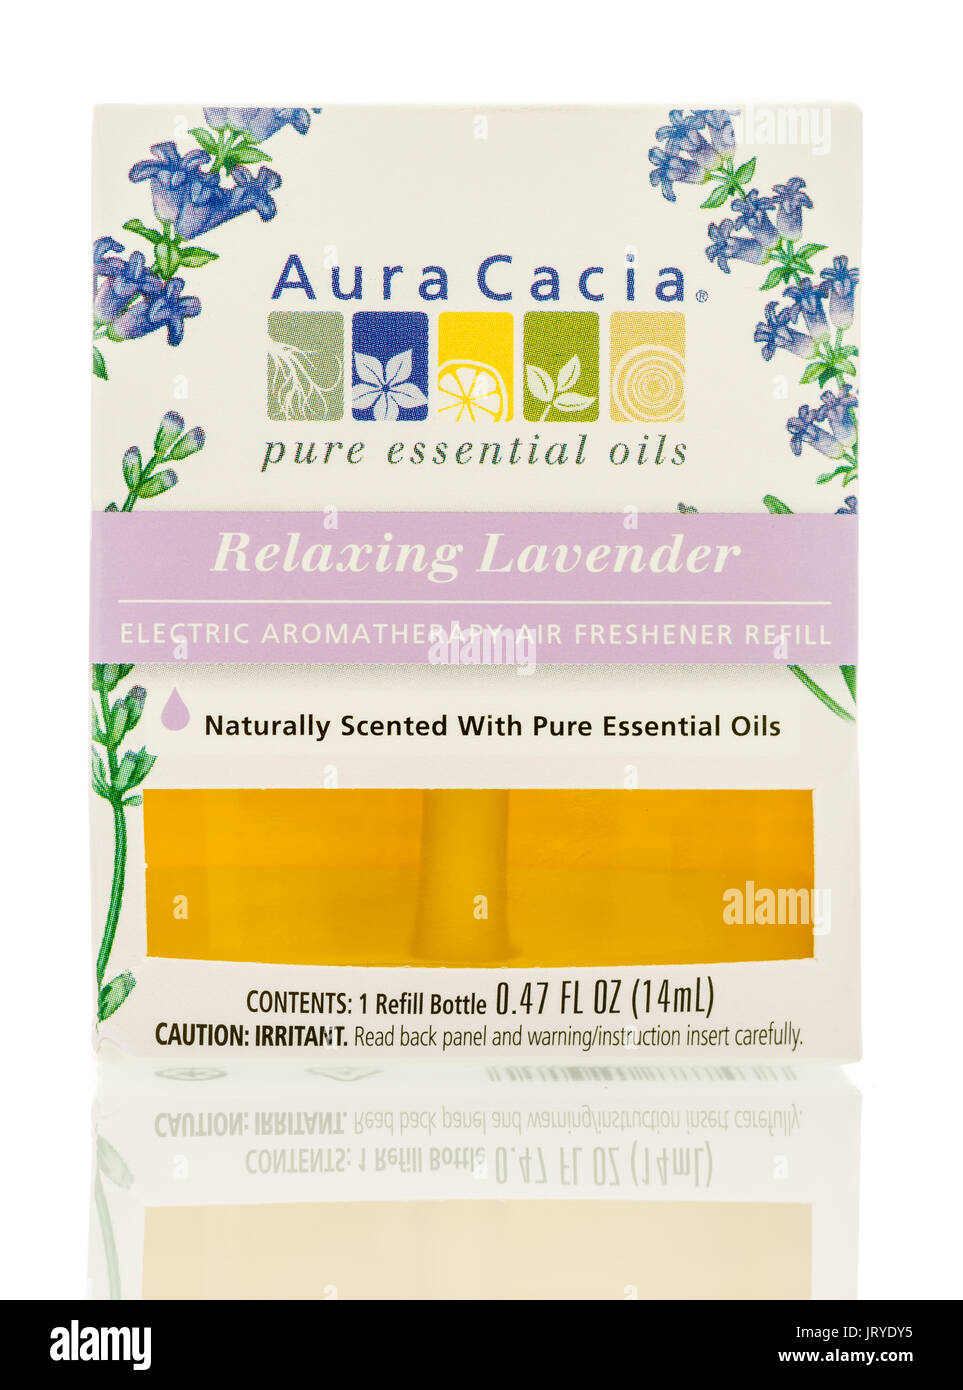 Winneconne, WI - 6 August 2017:  A bottle of Aura Cacia fragrance oil in relaxing lavender scent on an isolated background. Stock Photo